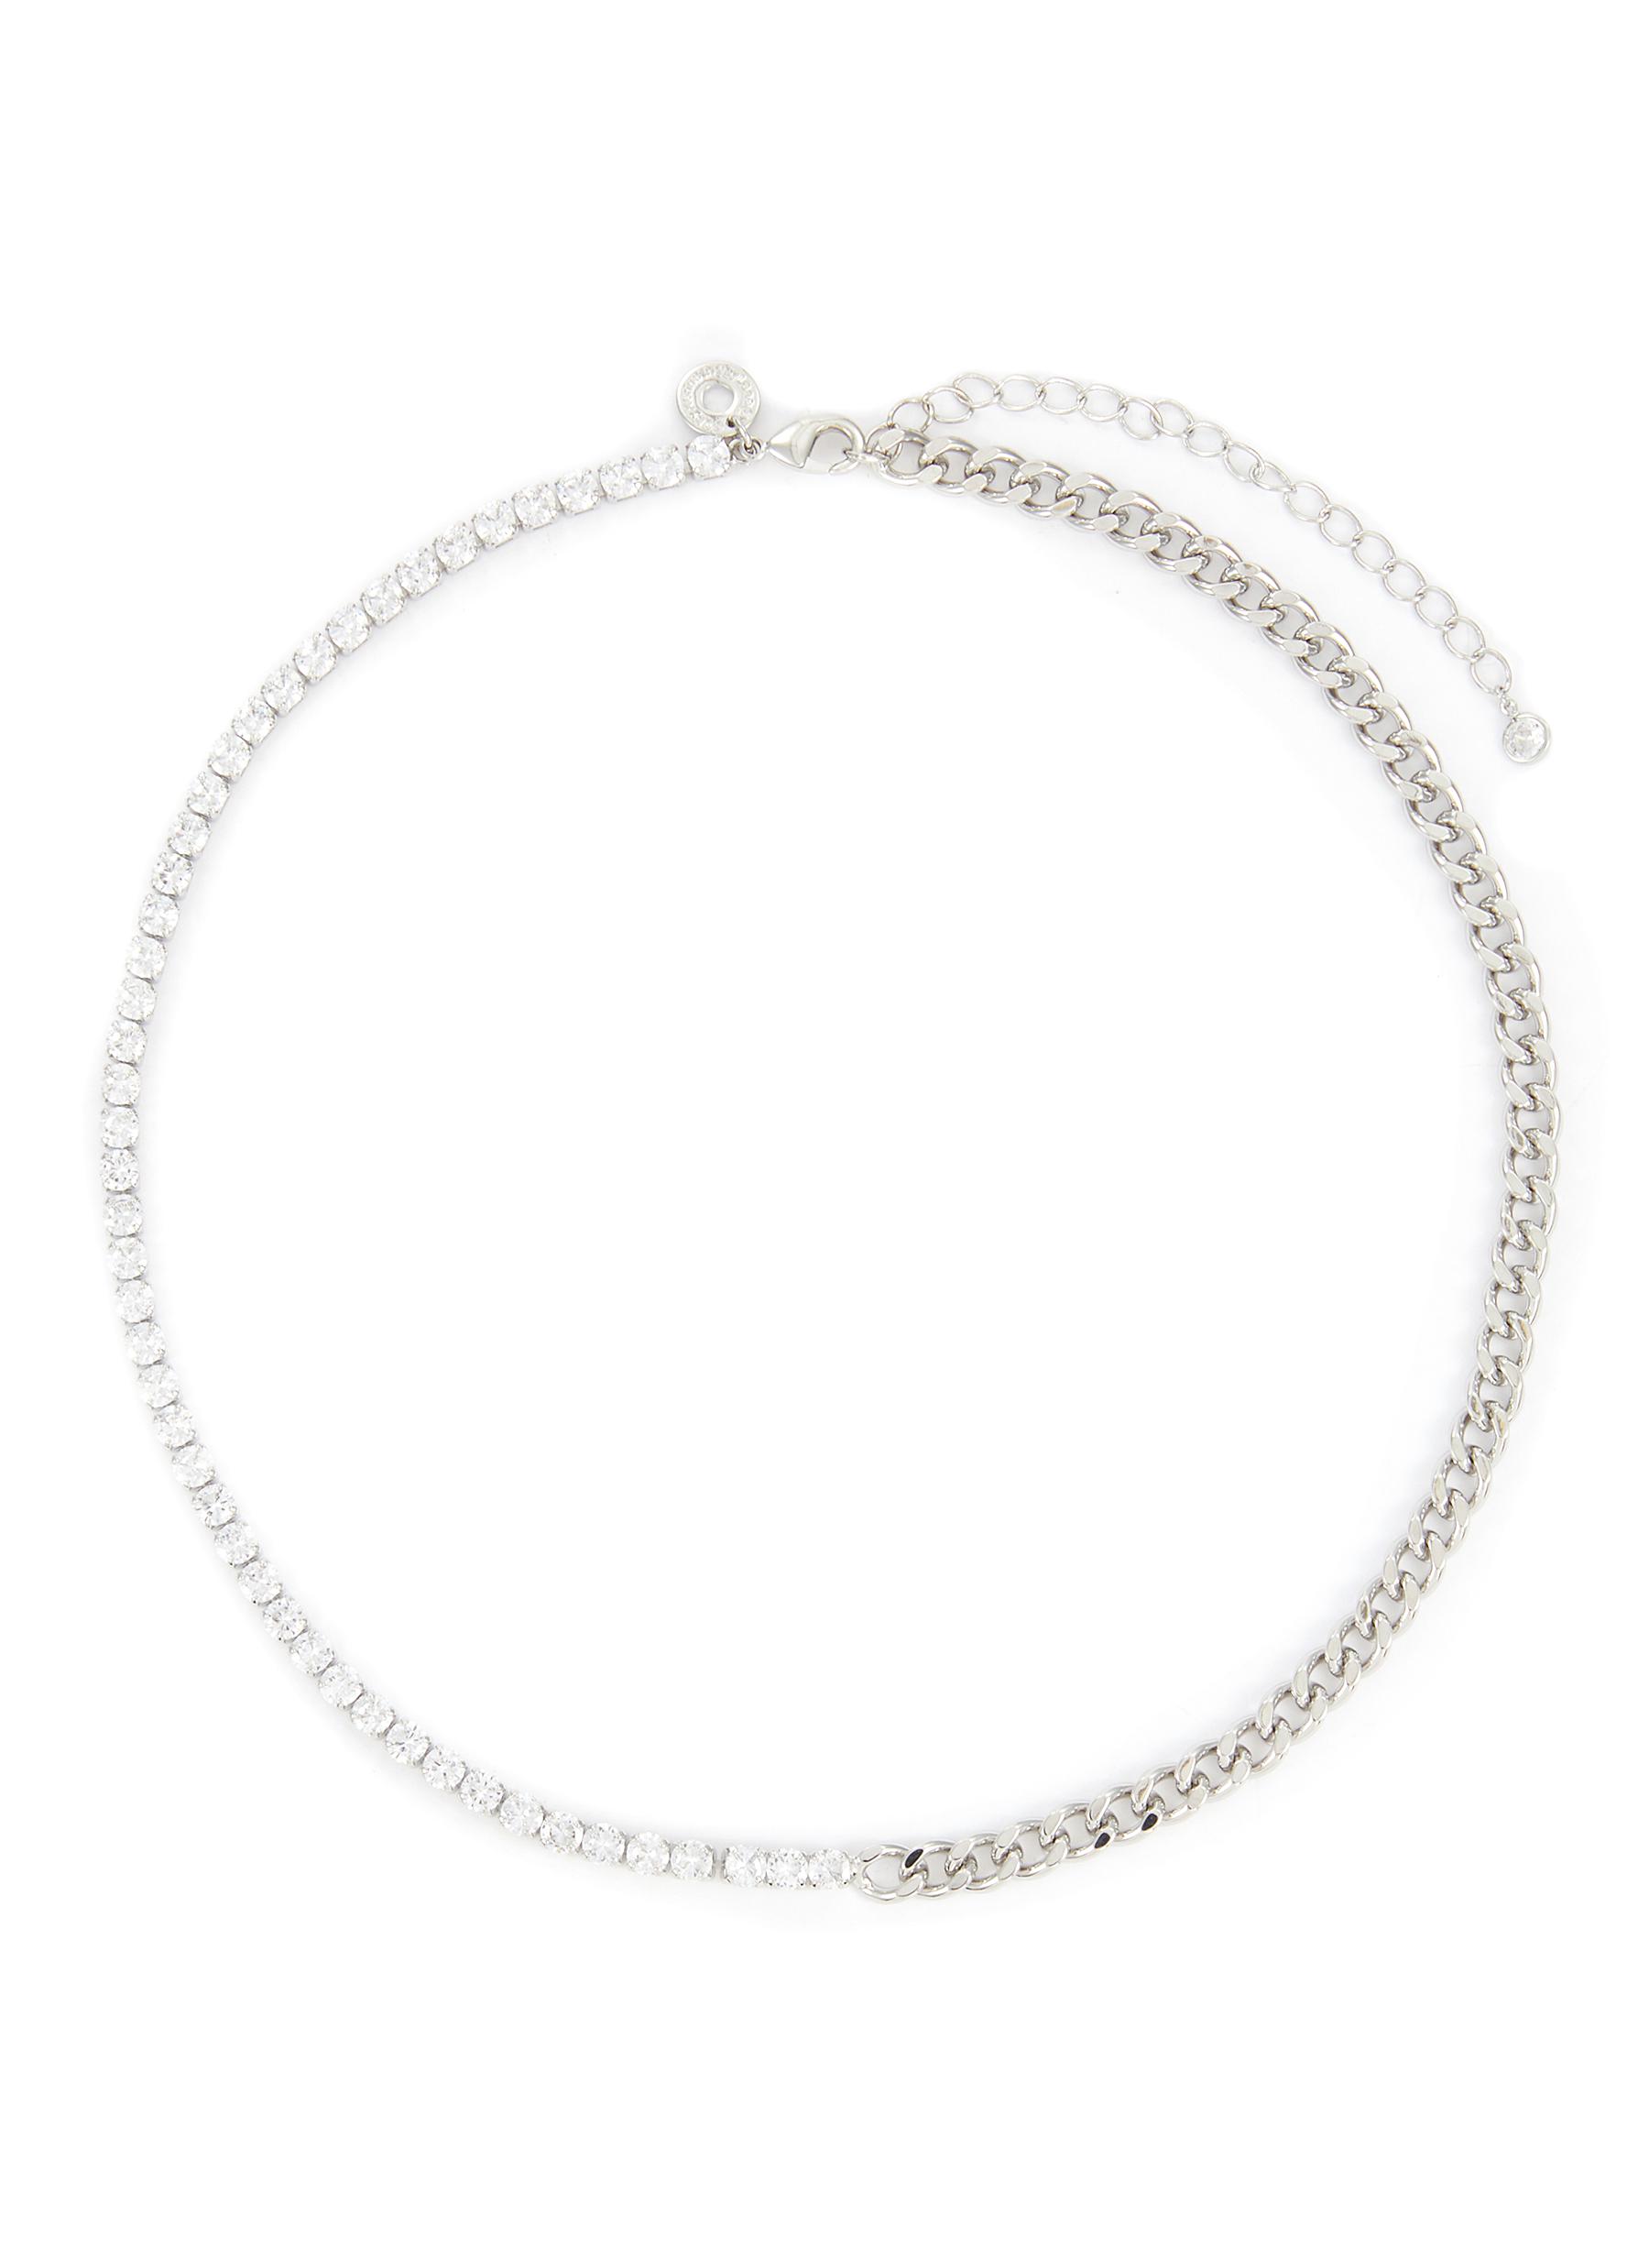 CZ BY KENNETH JAY LANE Silver Toned Metal Cubic Zirconia Curb Chain Necklace